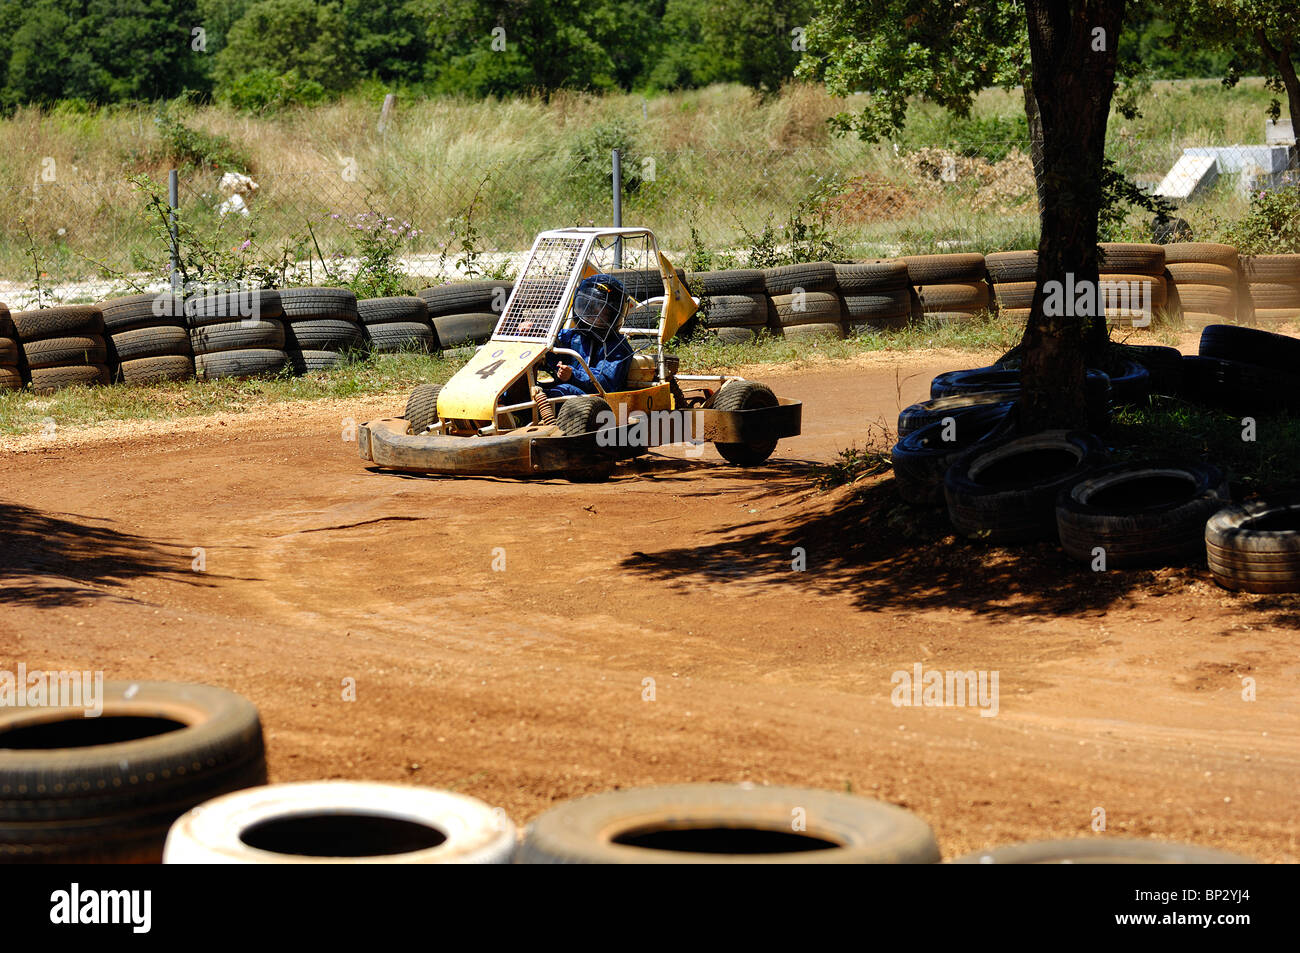 Young Teen in off road cart Stock Photo